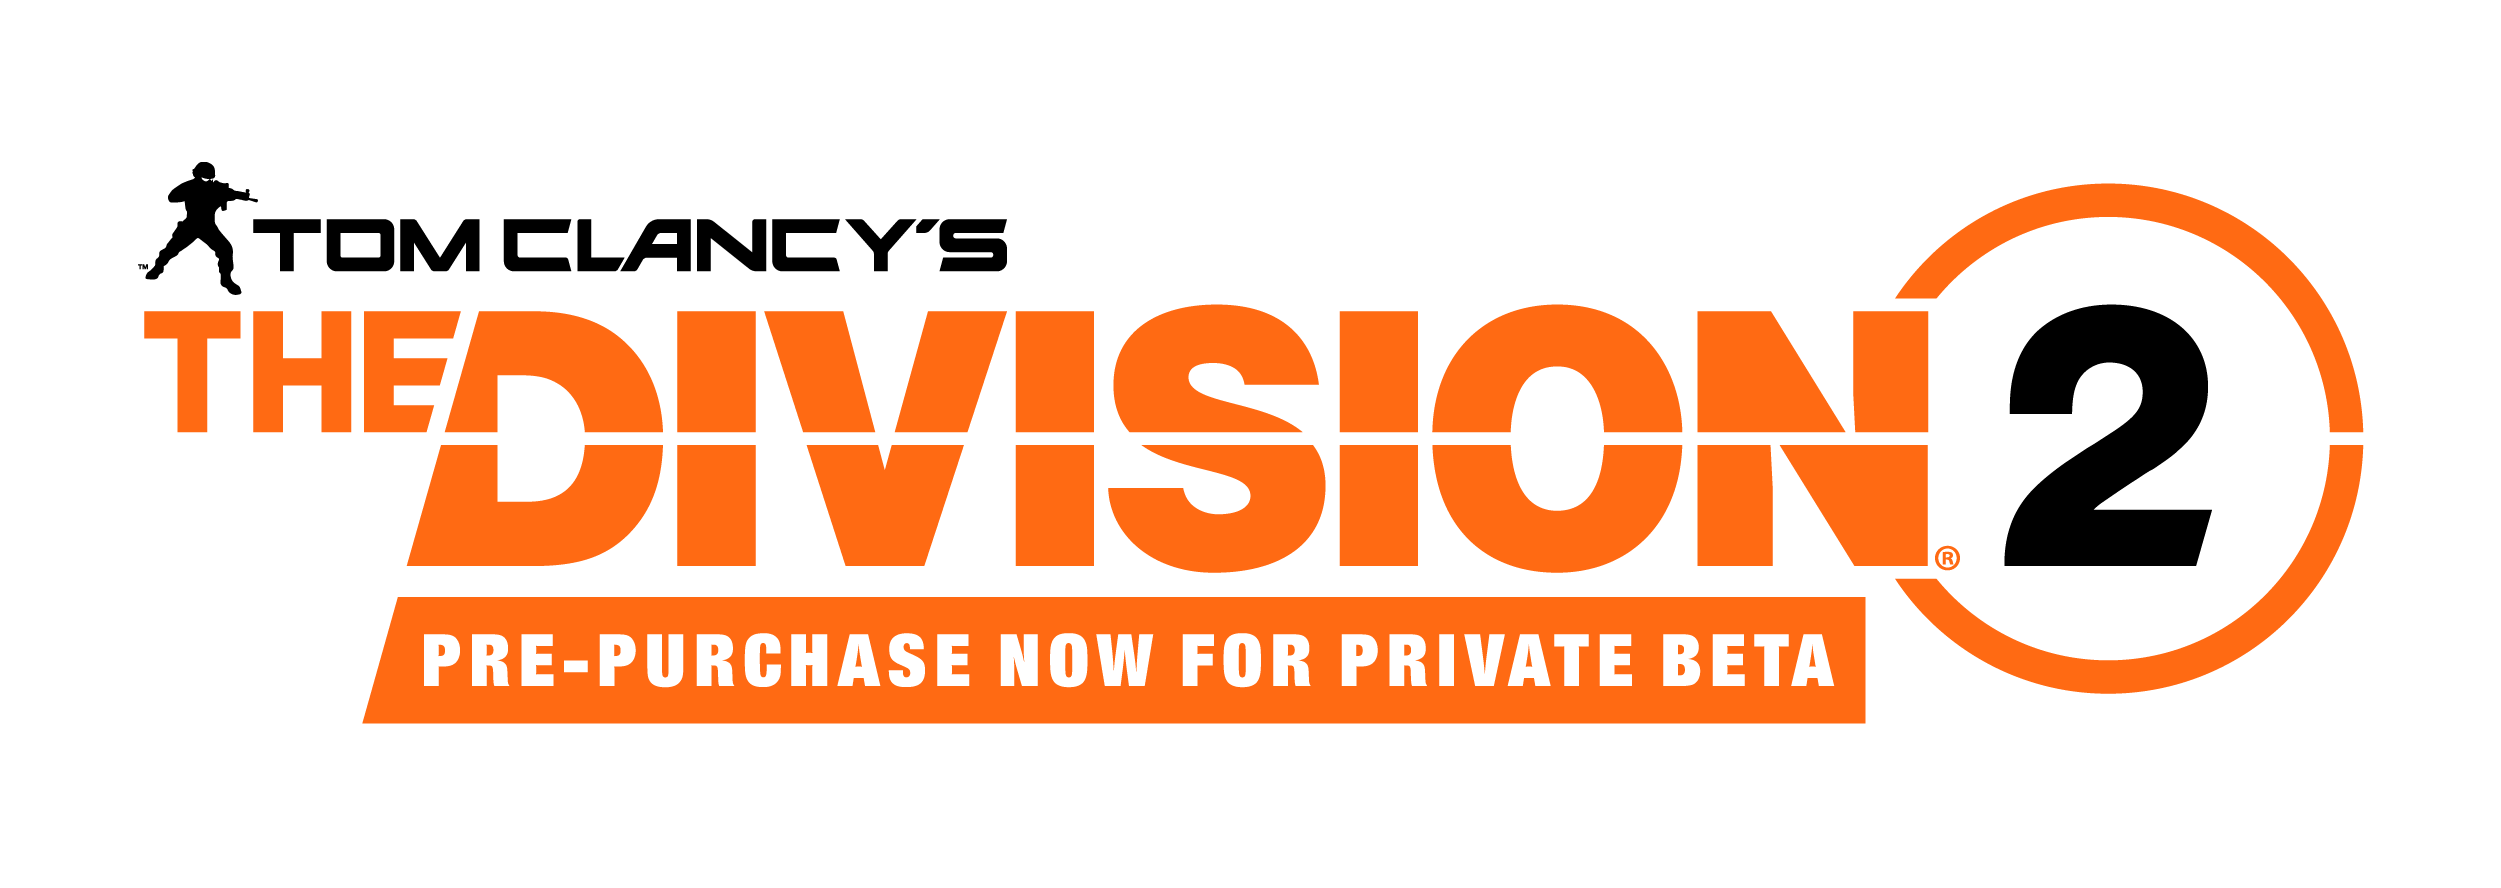 Tom Clancy's the Division Logo - Private Beta - Private Beta for Tom Clancy's The Division 2